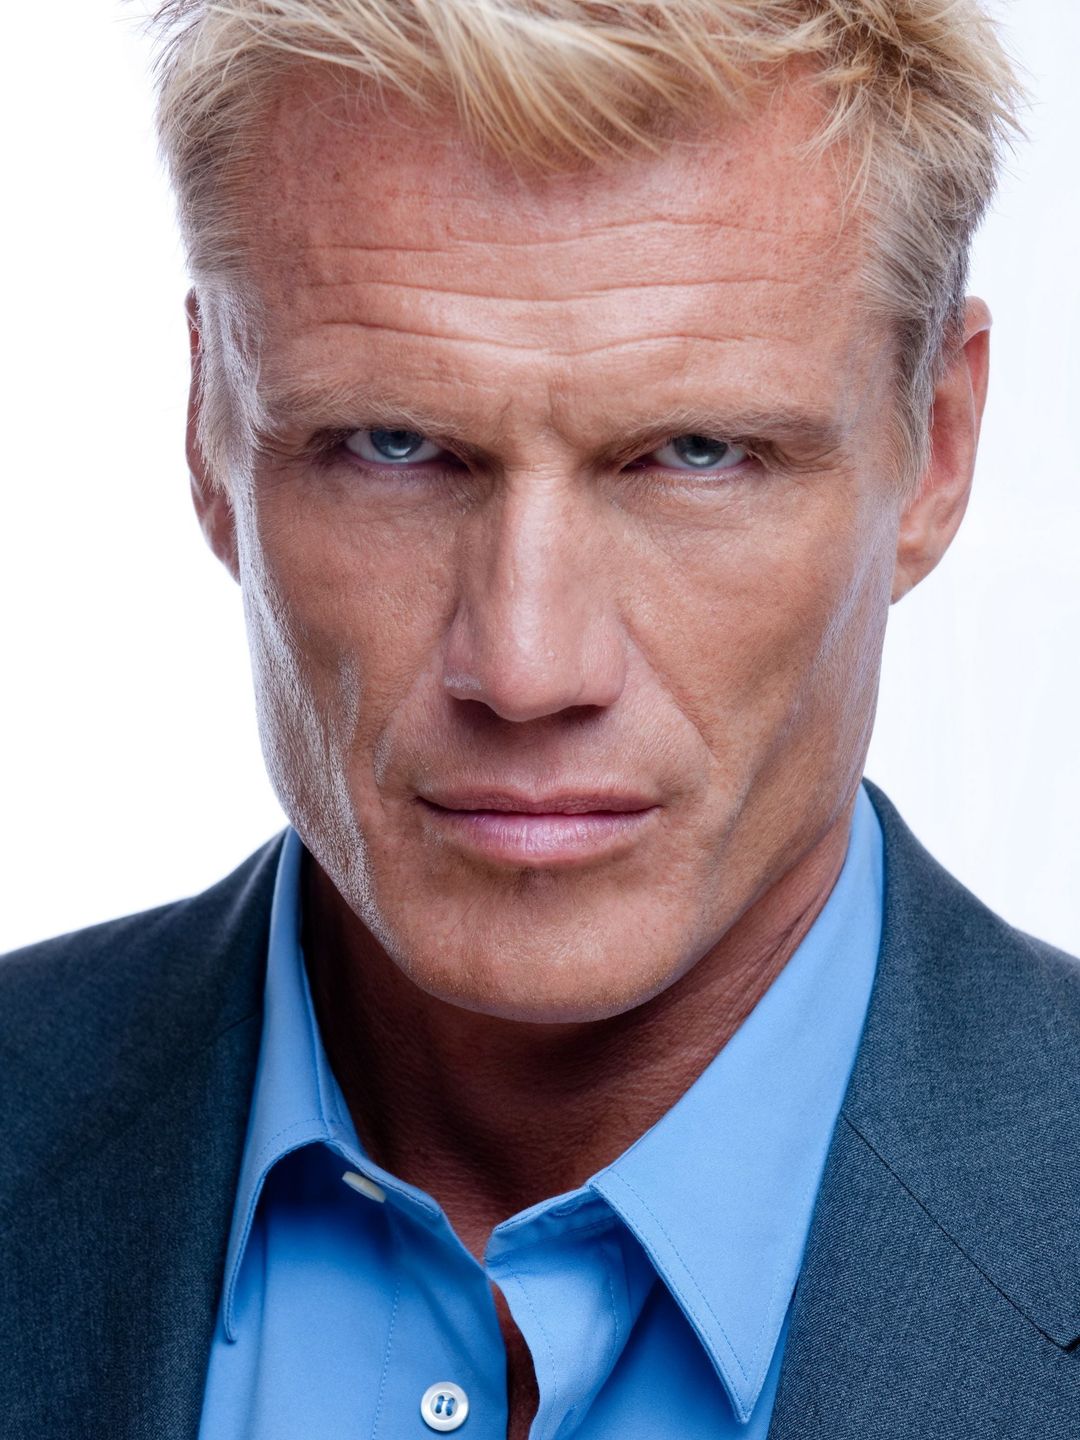 Dolph Lundgren early life